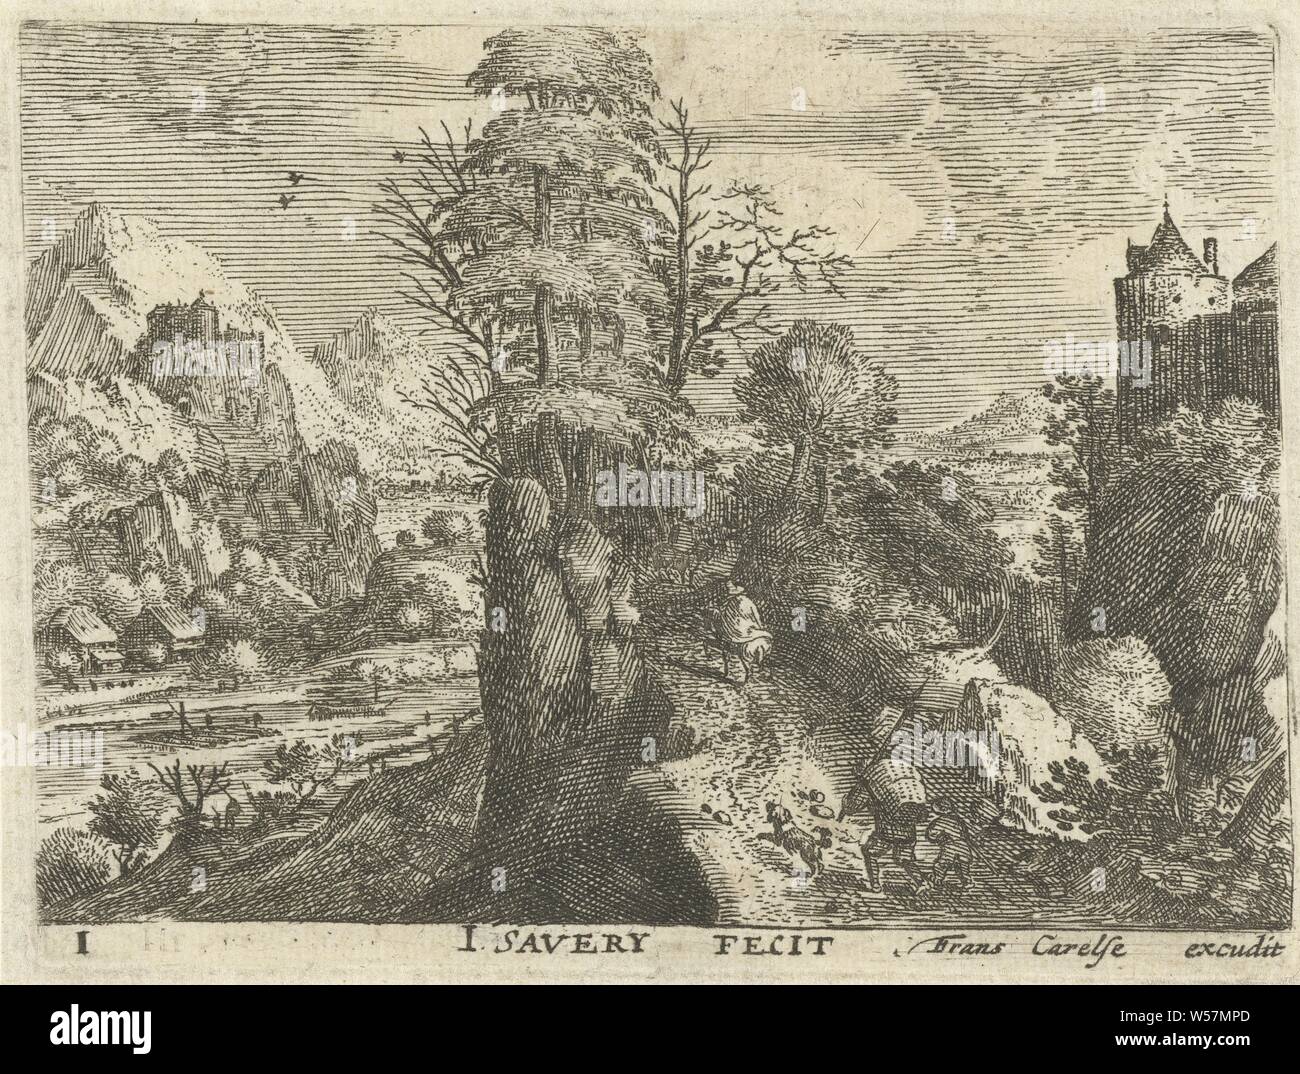 Landscape with travelers on steep rock Six landscapes with travelers (series title), In a mountainous landscape two travelers (a man with a basket on his back and a man walking boy) on a steep path with a dog, following two riders. On the left a river, on the right the tower of a castle. This print is part of a series of six landscapes with travelers., Jacob Savery (I) (mentioned on object),  1584 - 1603 and/or after 1639, paper, engraving, h 93 mm × w 122 mm Stock Photo